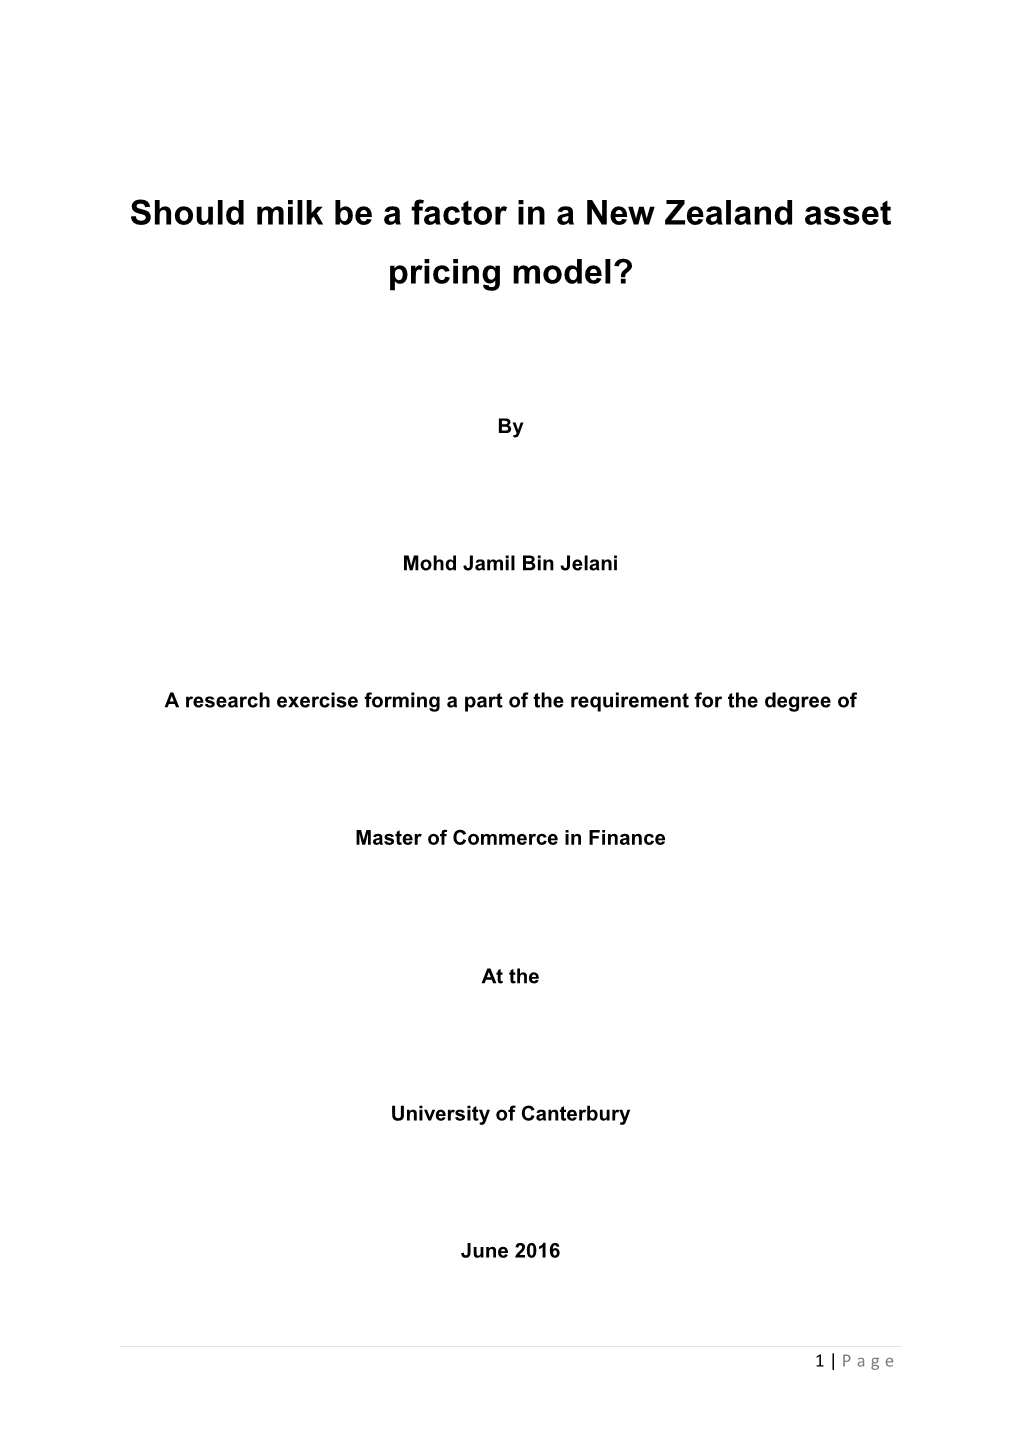 Should Milk Be a Factor in a New Zealand Asset Pricing Model?